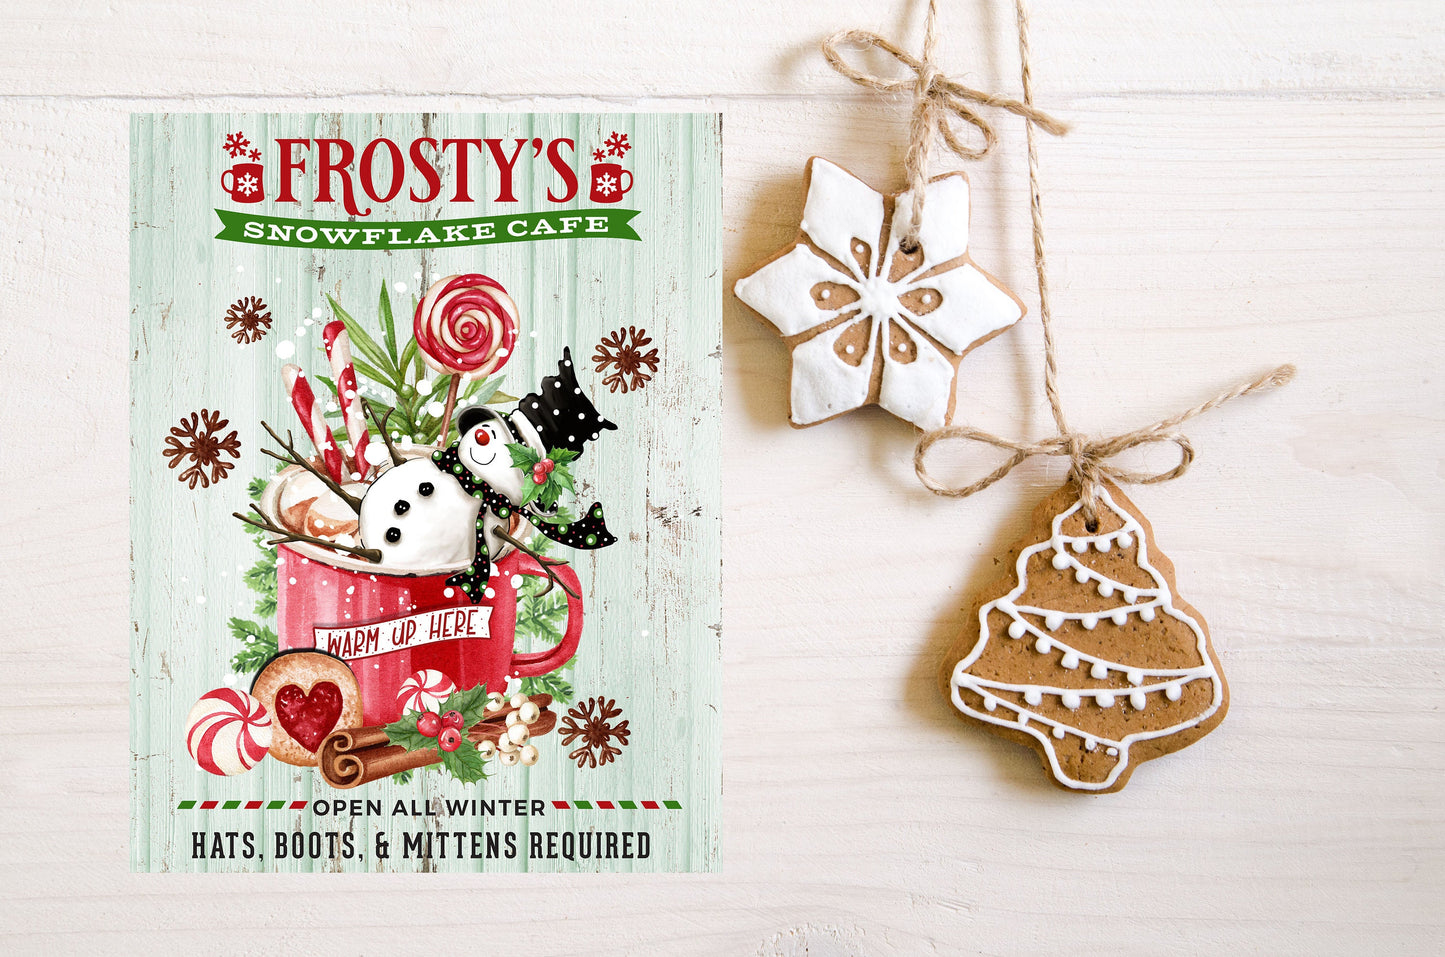 Frosty's Snowflake Cafe Christmas Printed Handmade Wood Sign